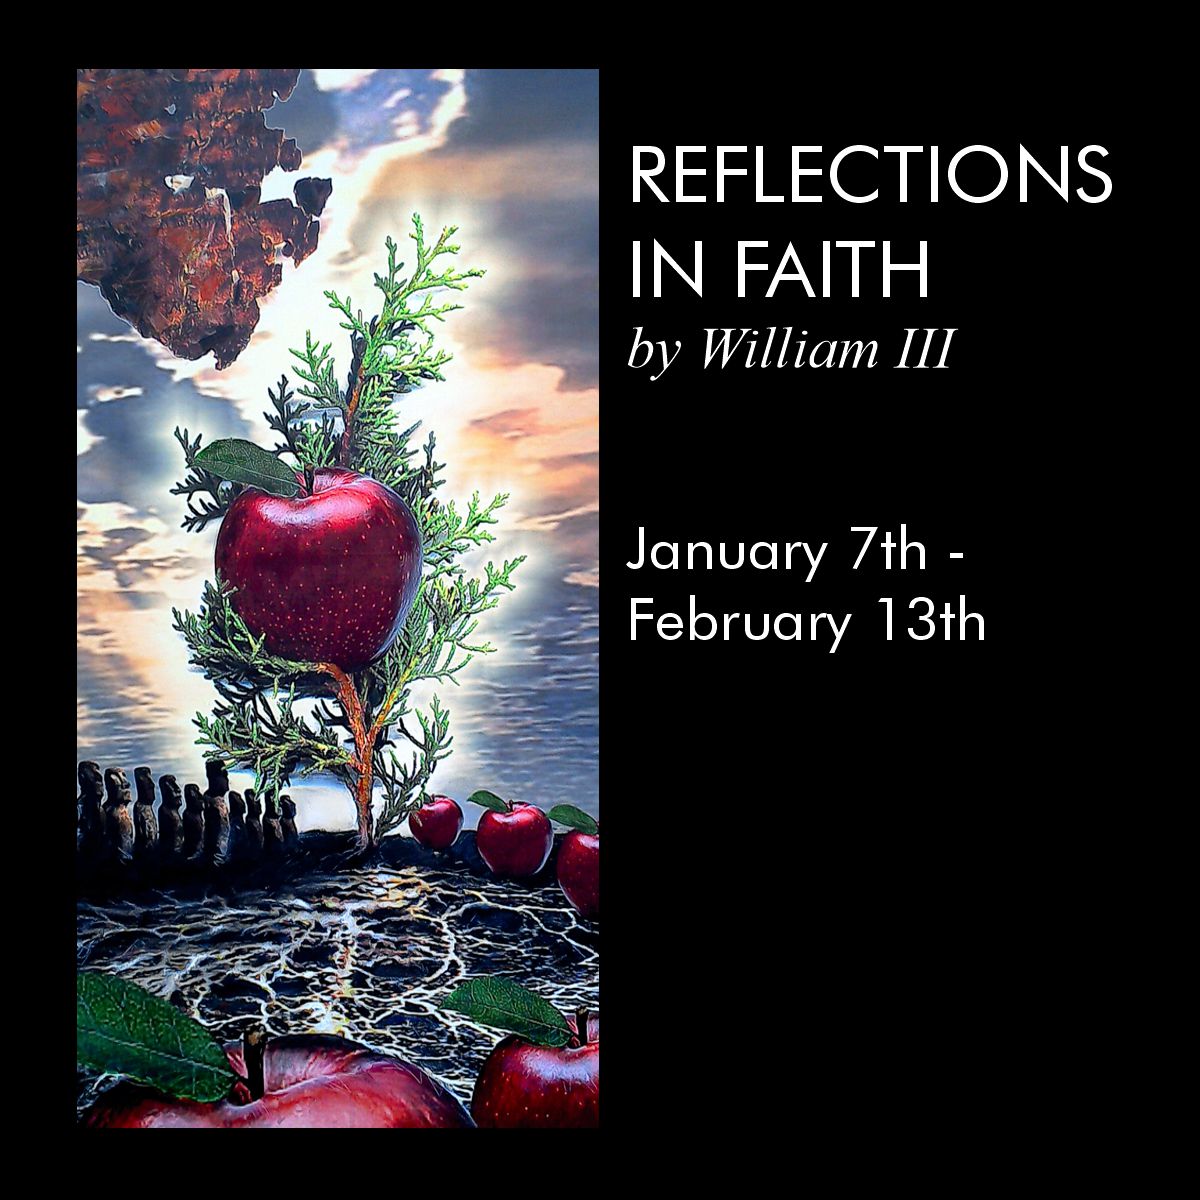 Reflection in Faith exhibit at Hayner Cutural Center in Troy, Ohio